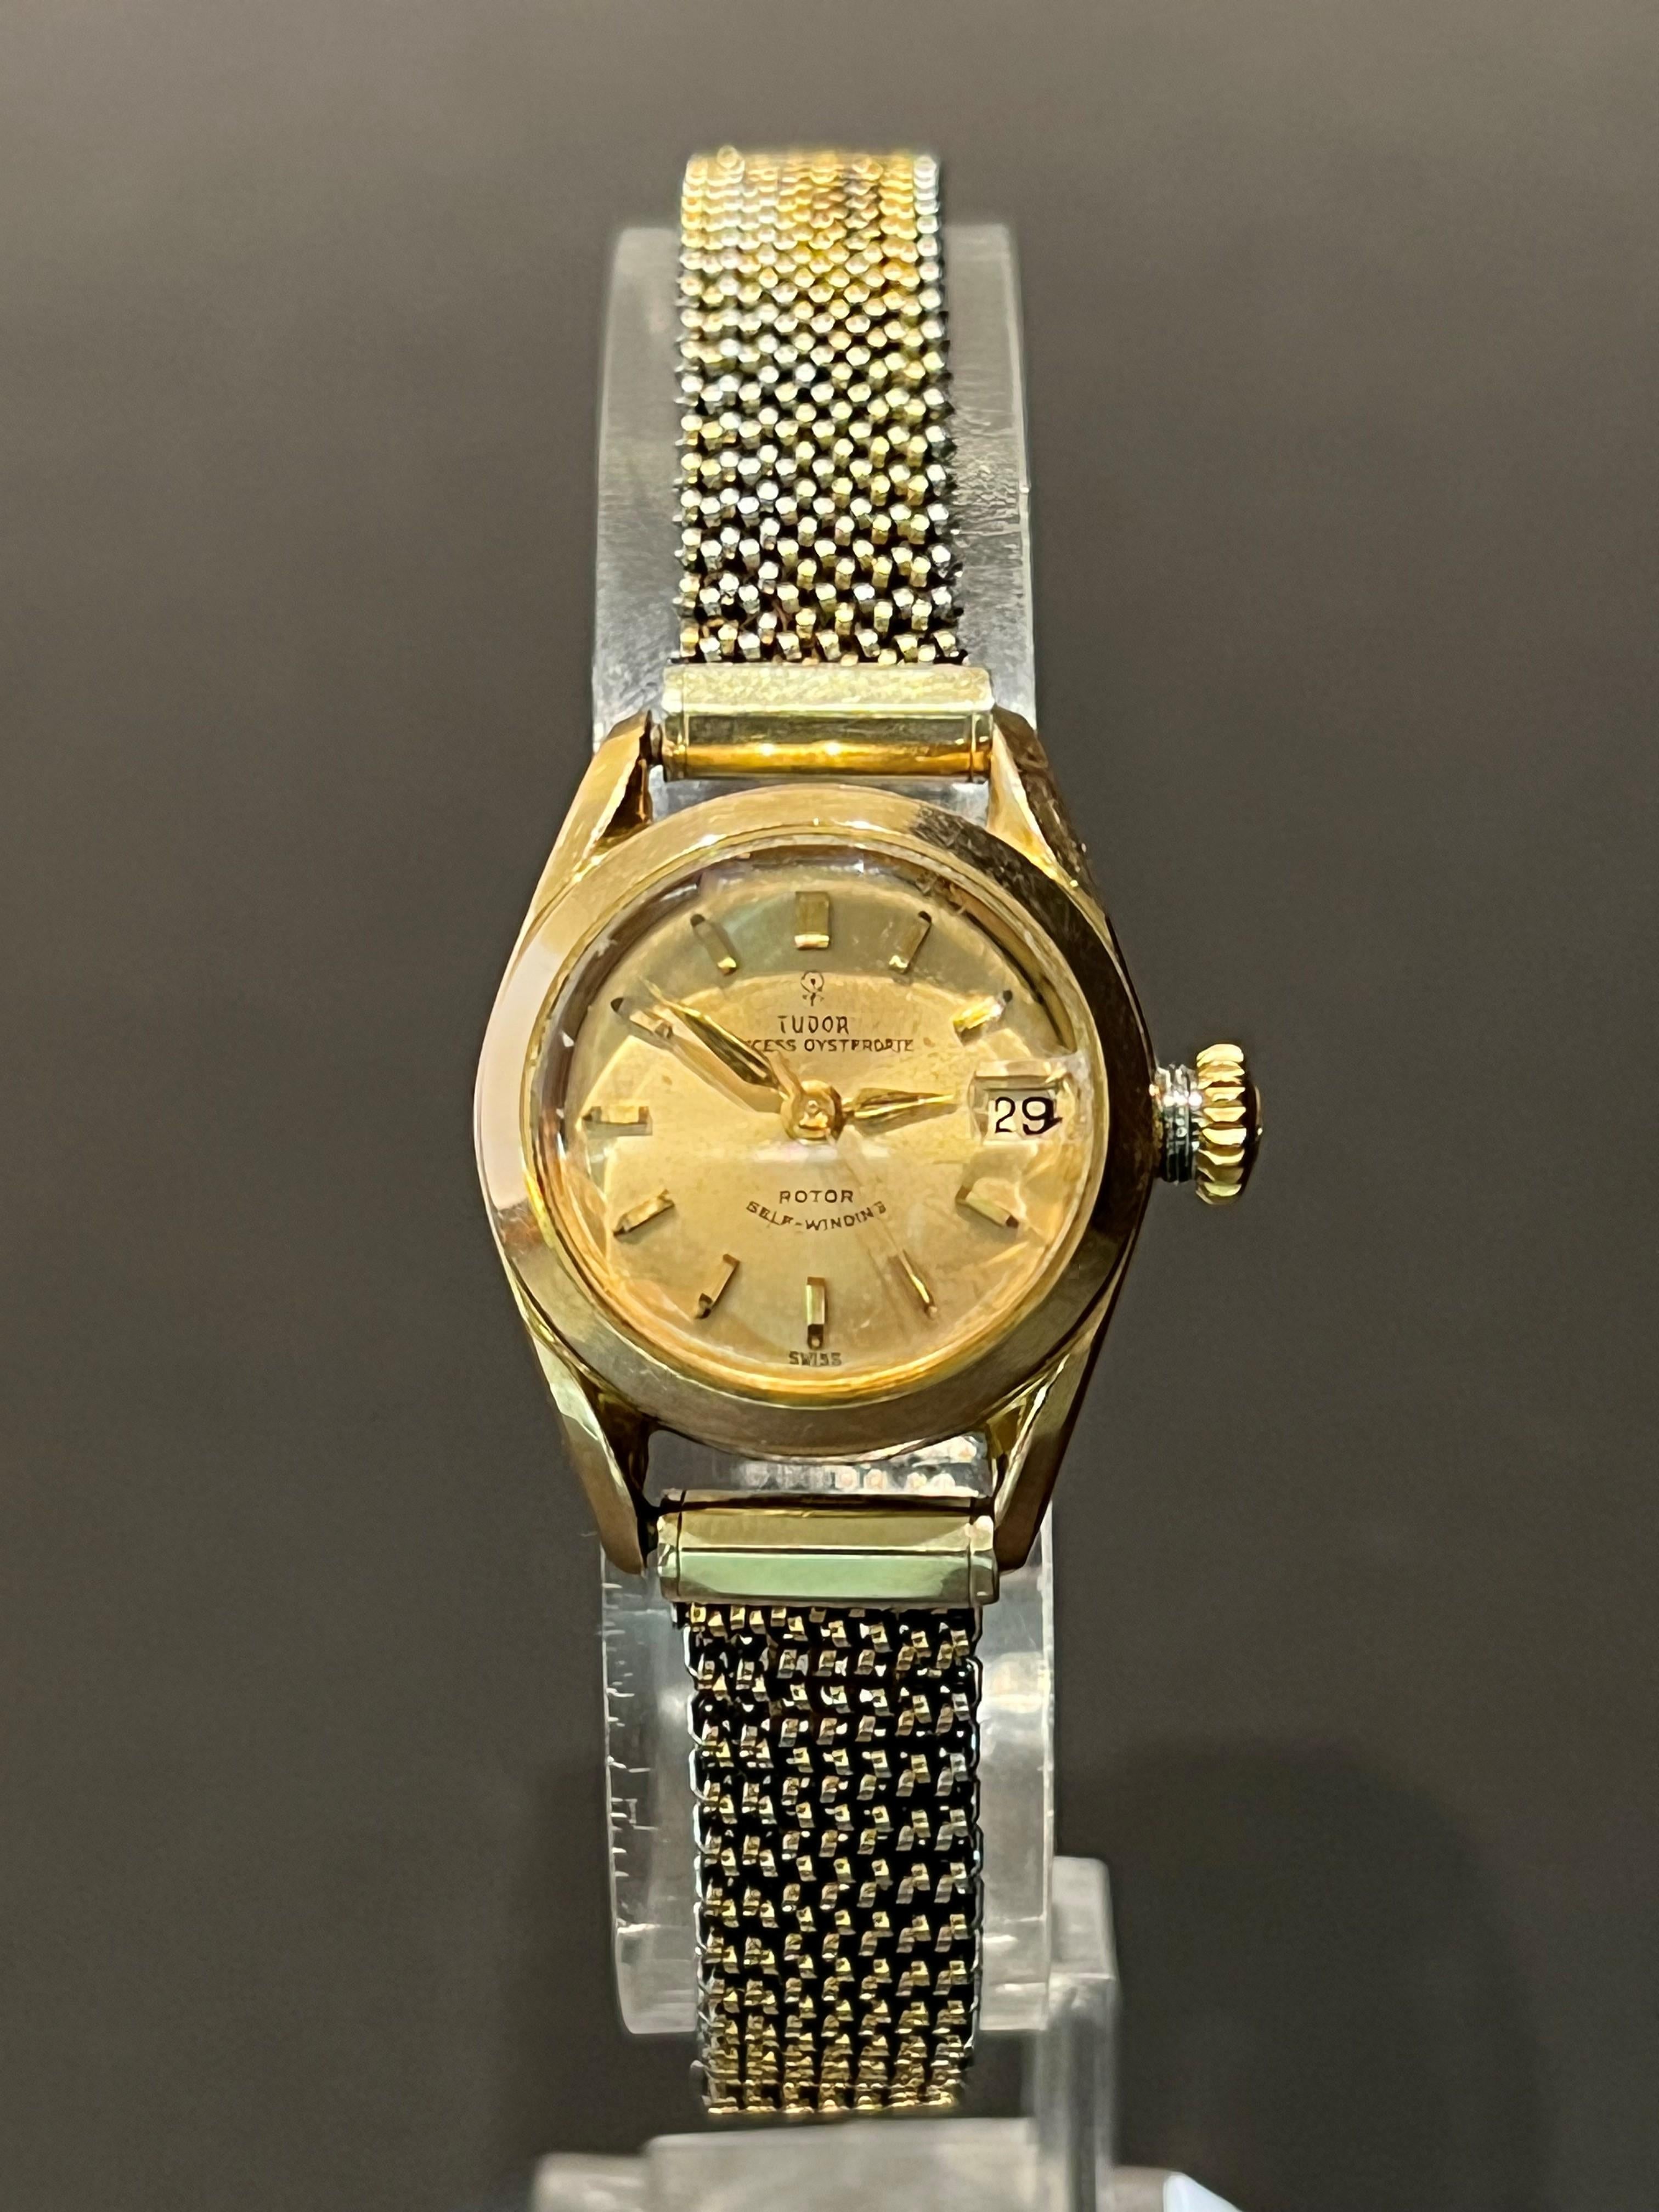 Rolex Tudor Oyster Princess Reference 7580 from 1966 with Rolex Oyster Case. 

Rotor, self-winding, screw-down crown, swiss, not original band – stretchable band.

Length: 7